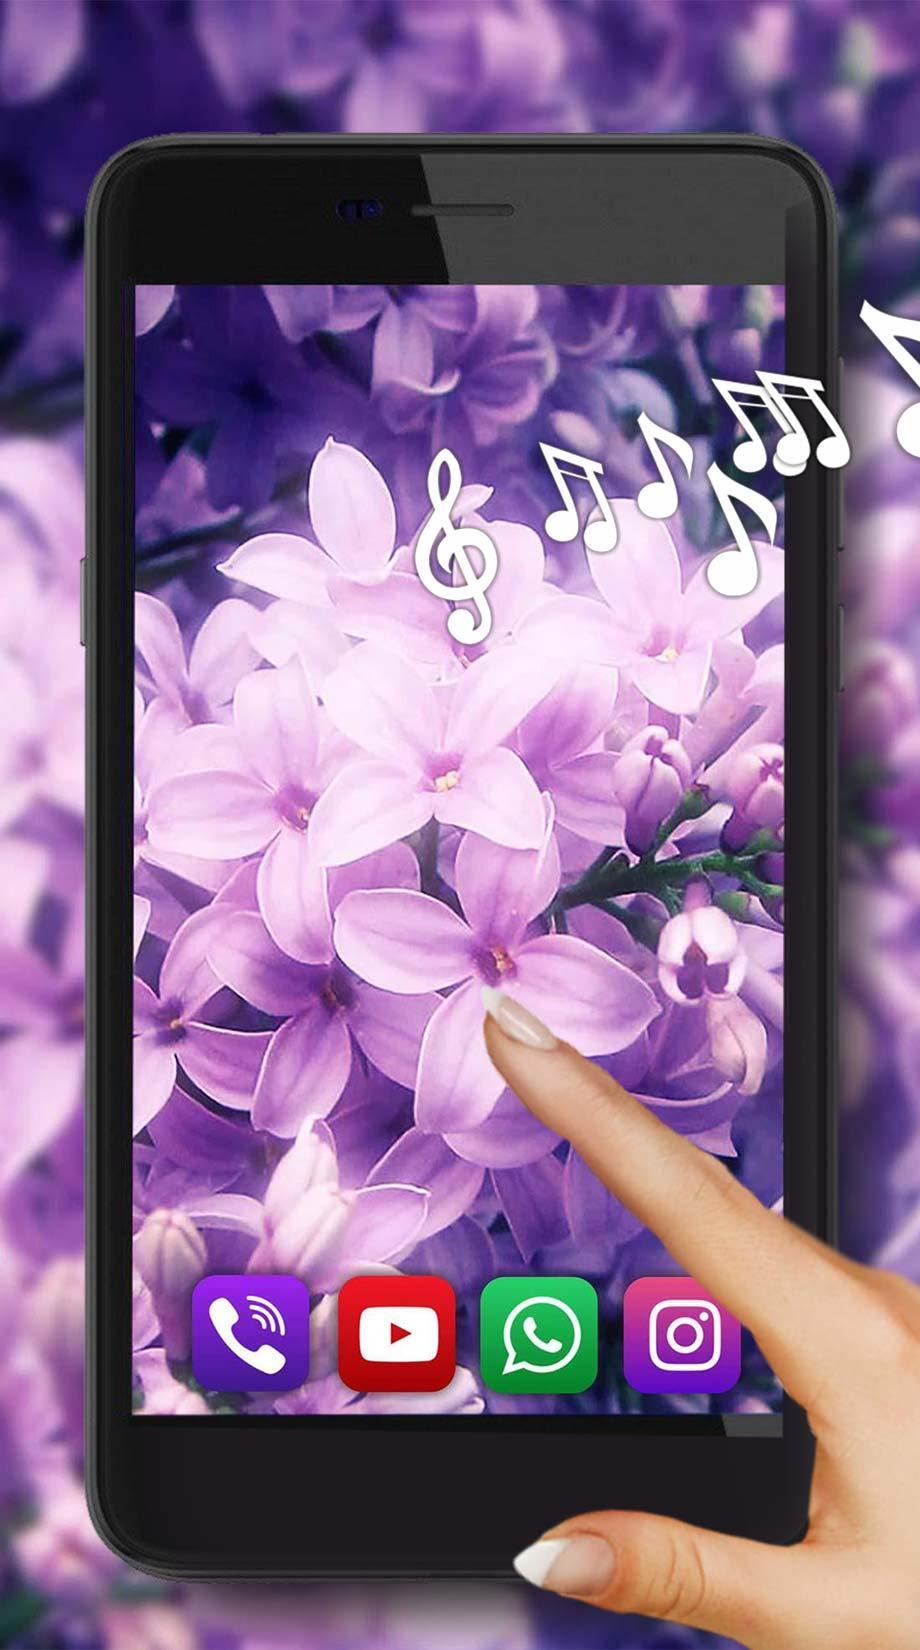 Lilac Flowers Live Wallpaper